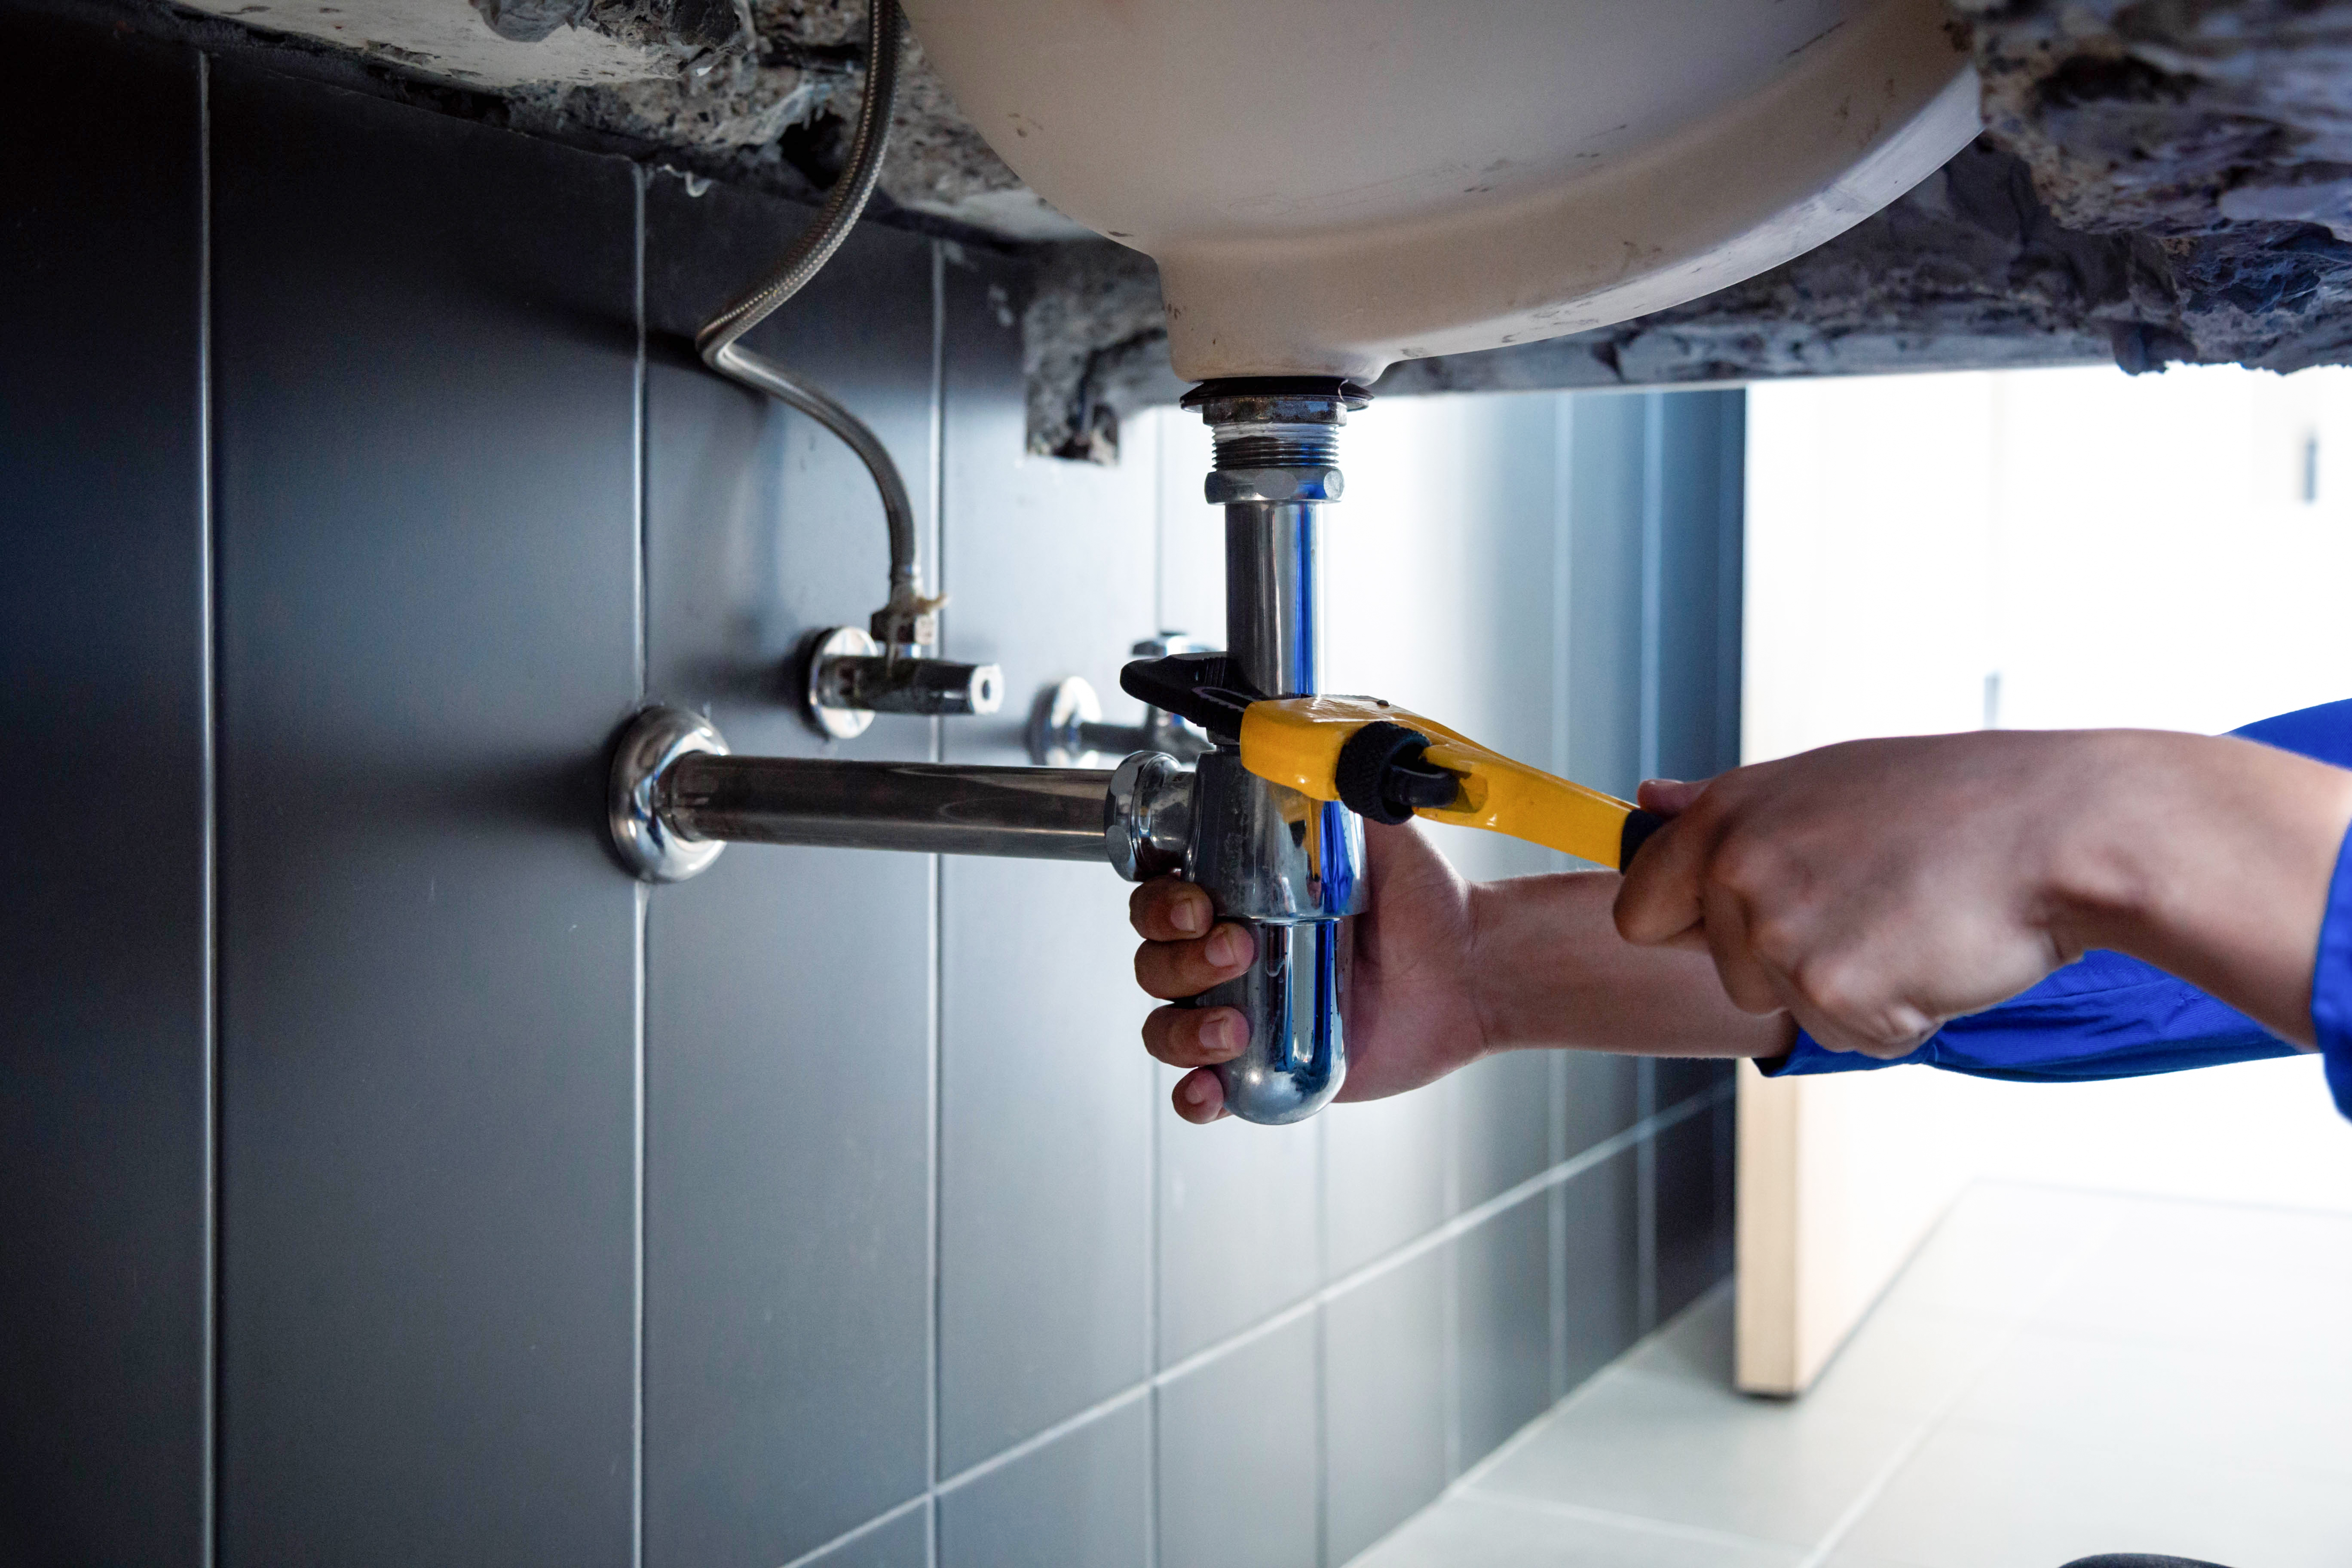 Plumber Fixing White Sink Pipe With Adjustable Wrench.